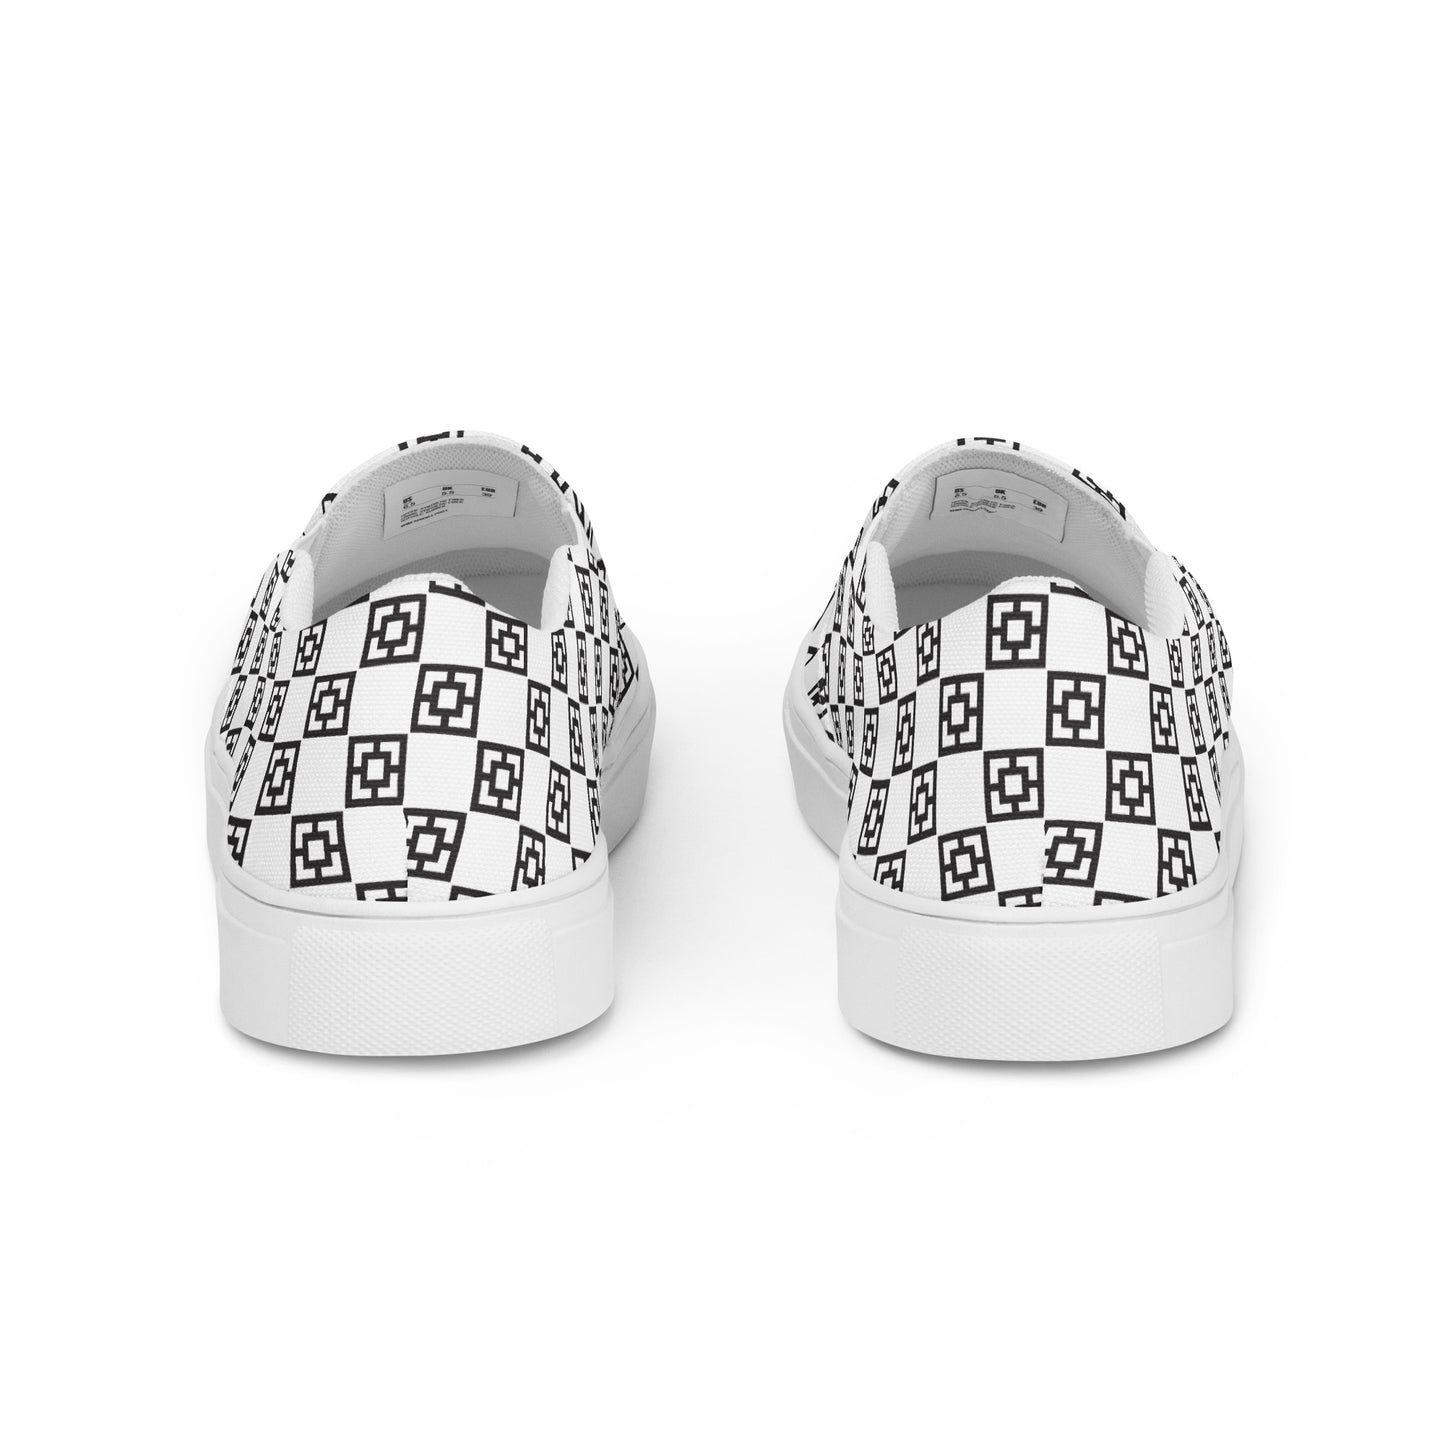 Women’s Mid Mod Checkerboard slip-on canvas shoes